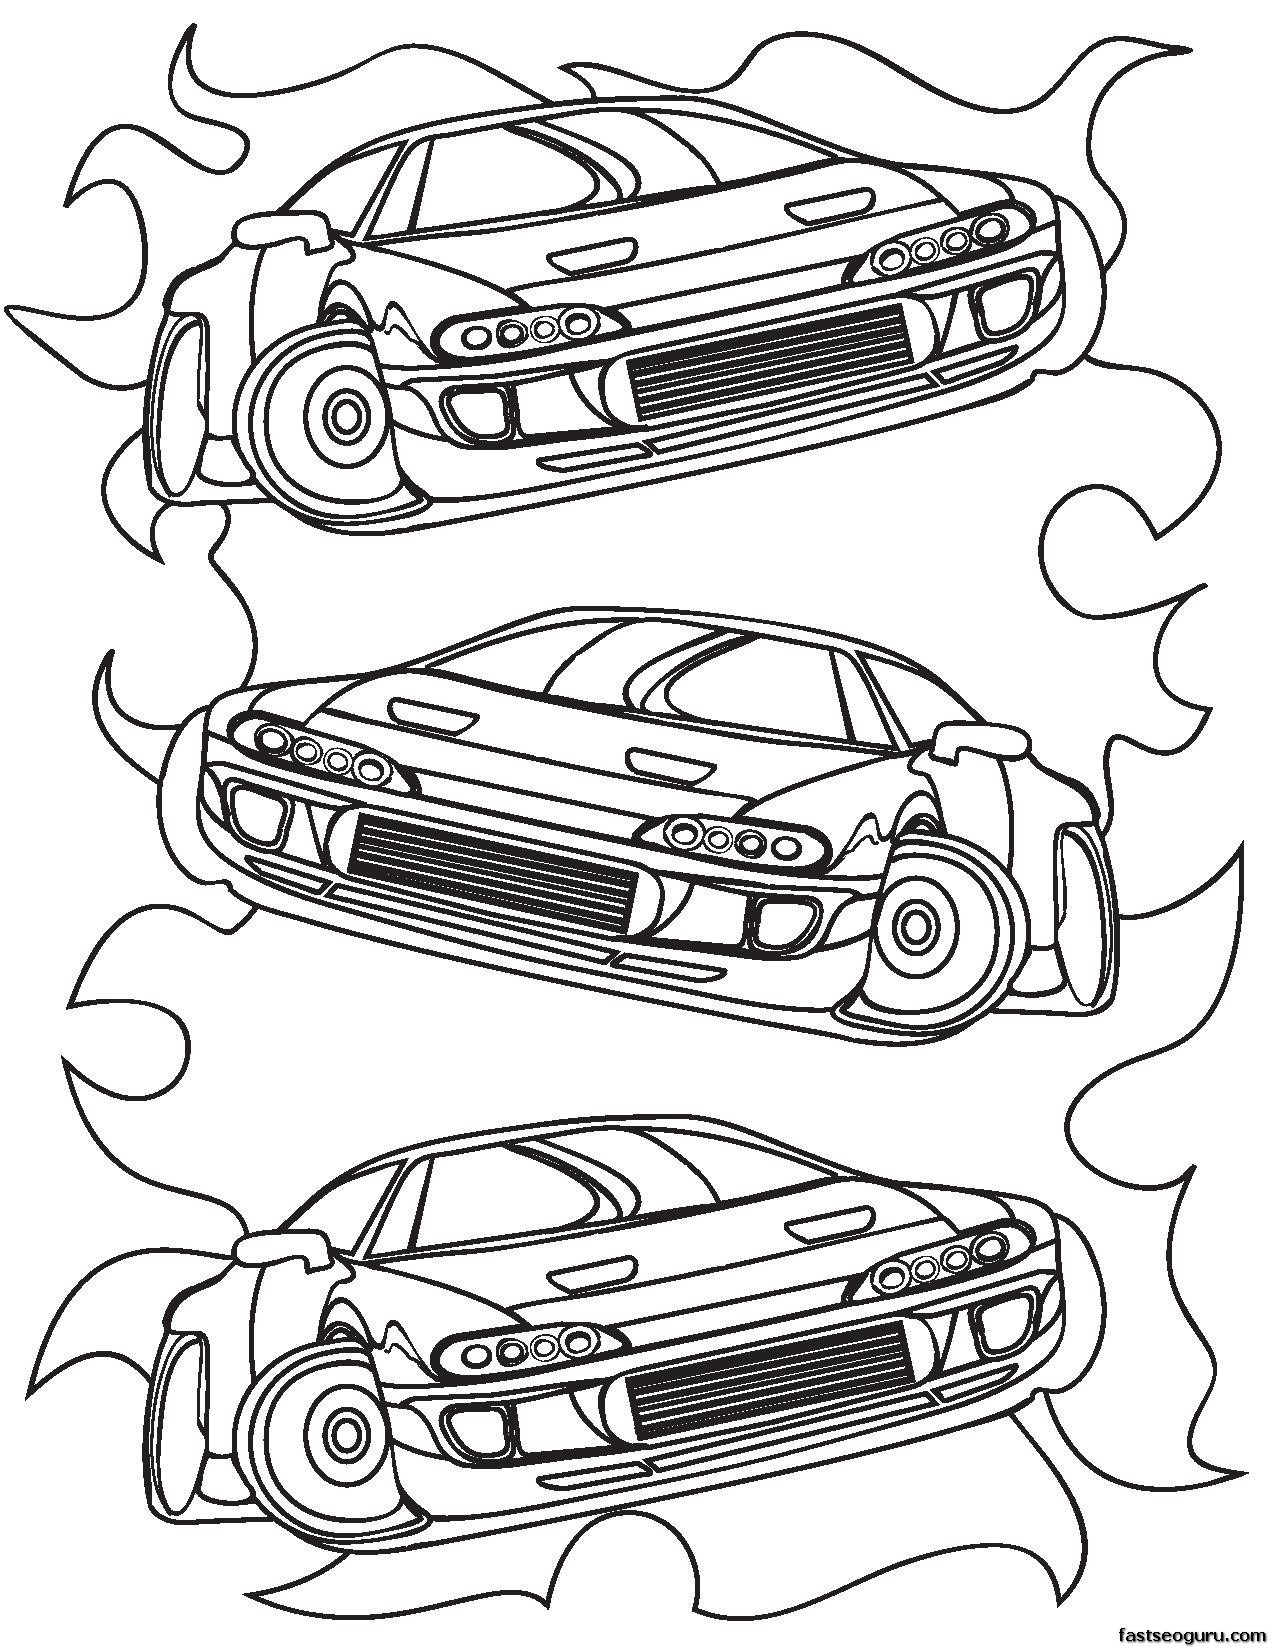 Coloring Pages For Boys Cars 32
 1000 images about Car truck birthday party on Pinterest